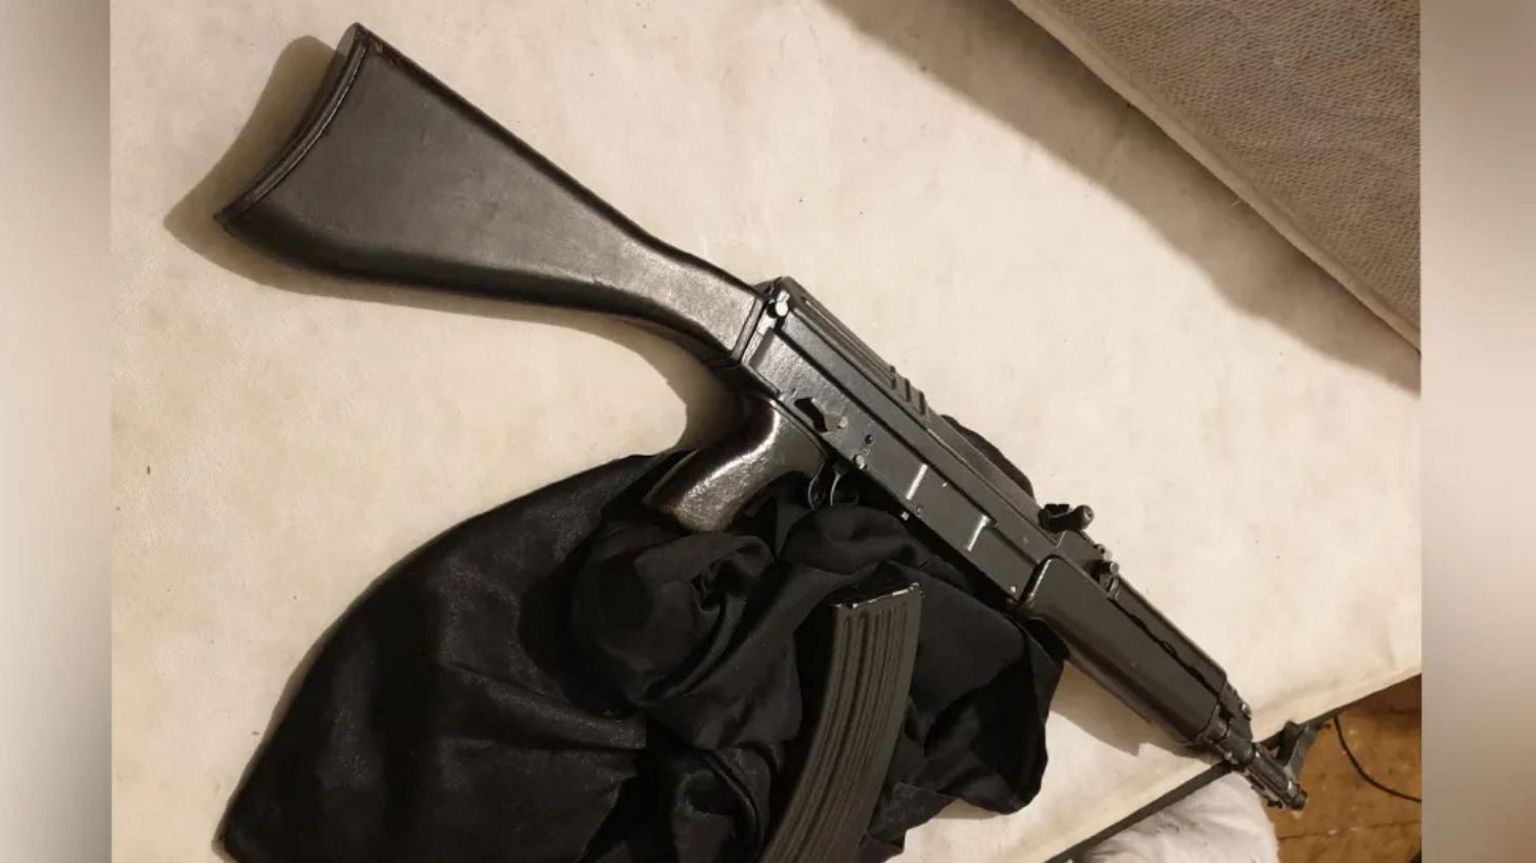 Assault rifle weapon recovered by police